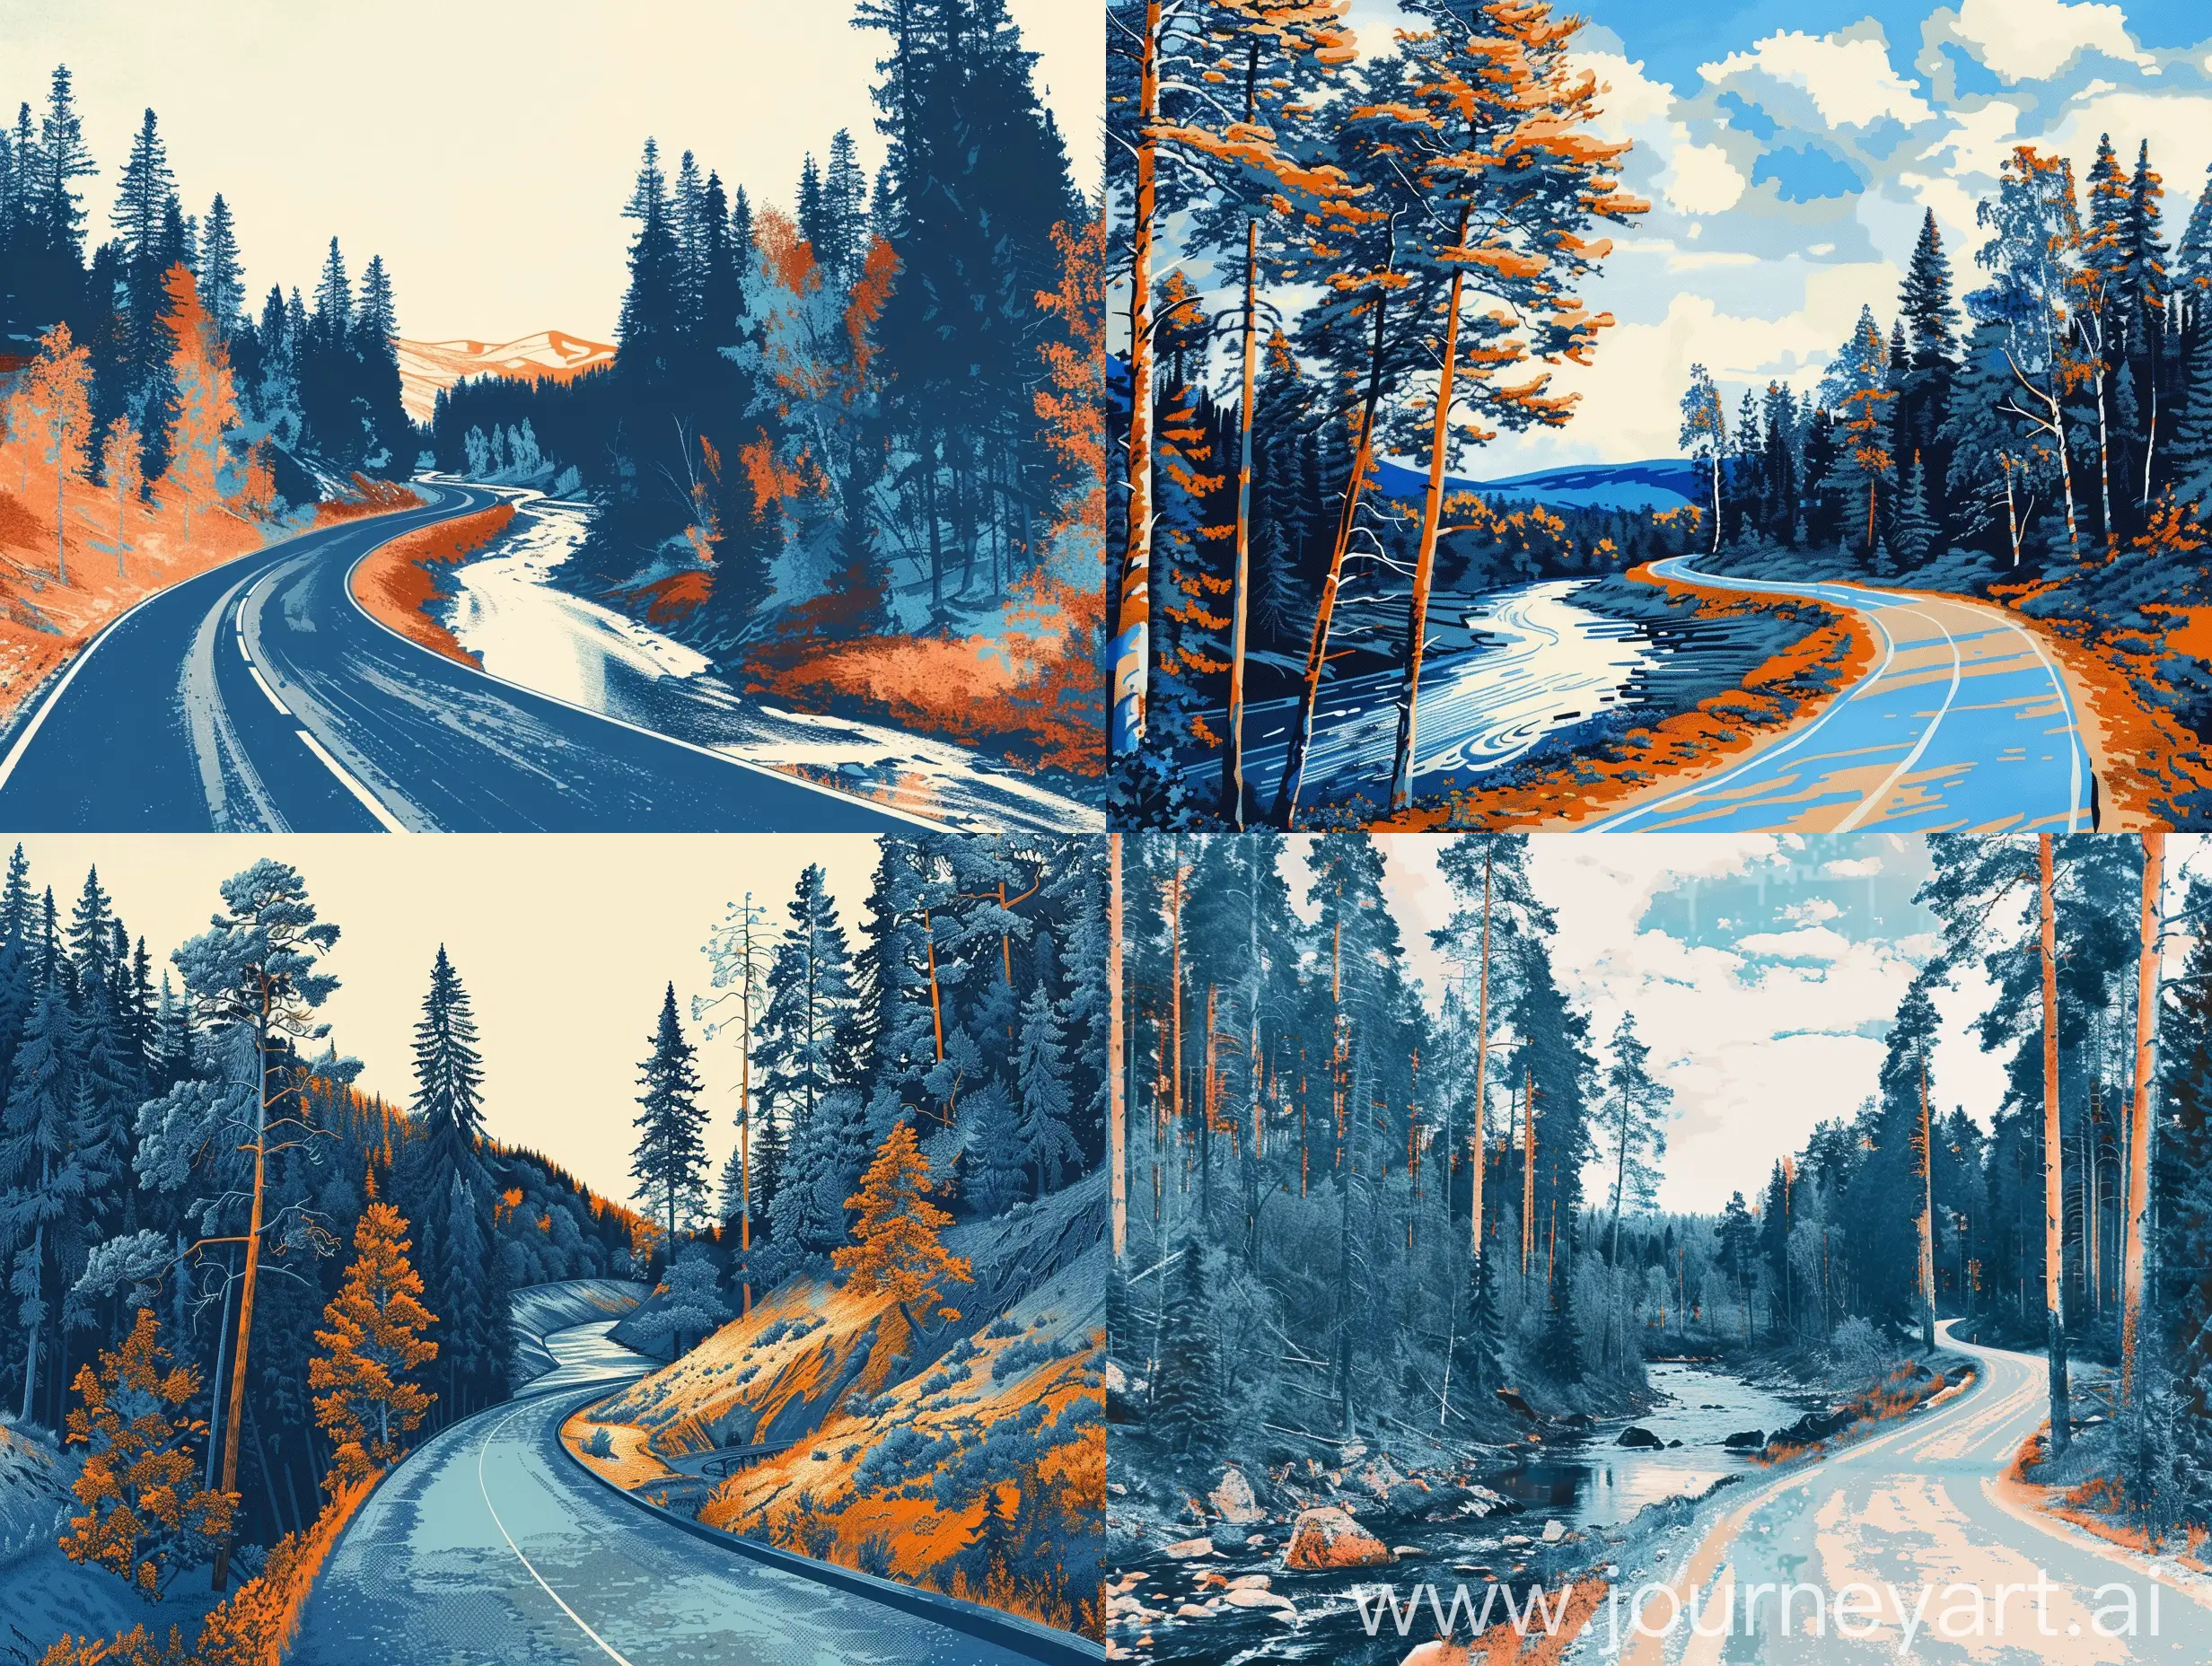 Scenic-Siberian-Forest-Road-with-River-Tranquil-80s-Graphics-in-Blue-Orange-and-White